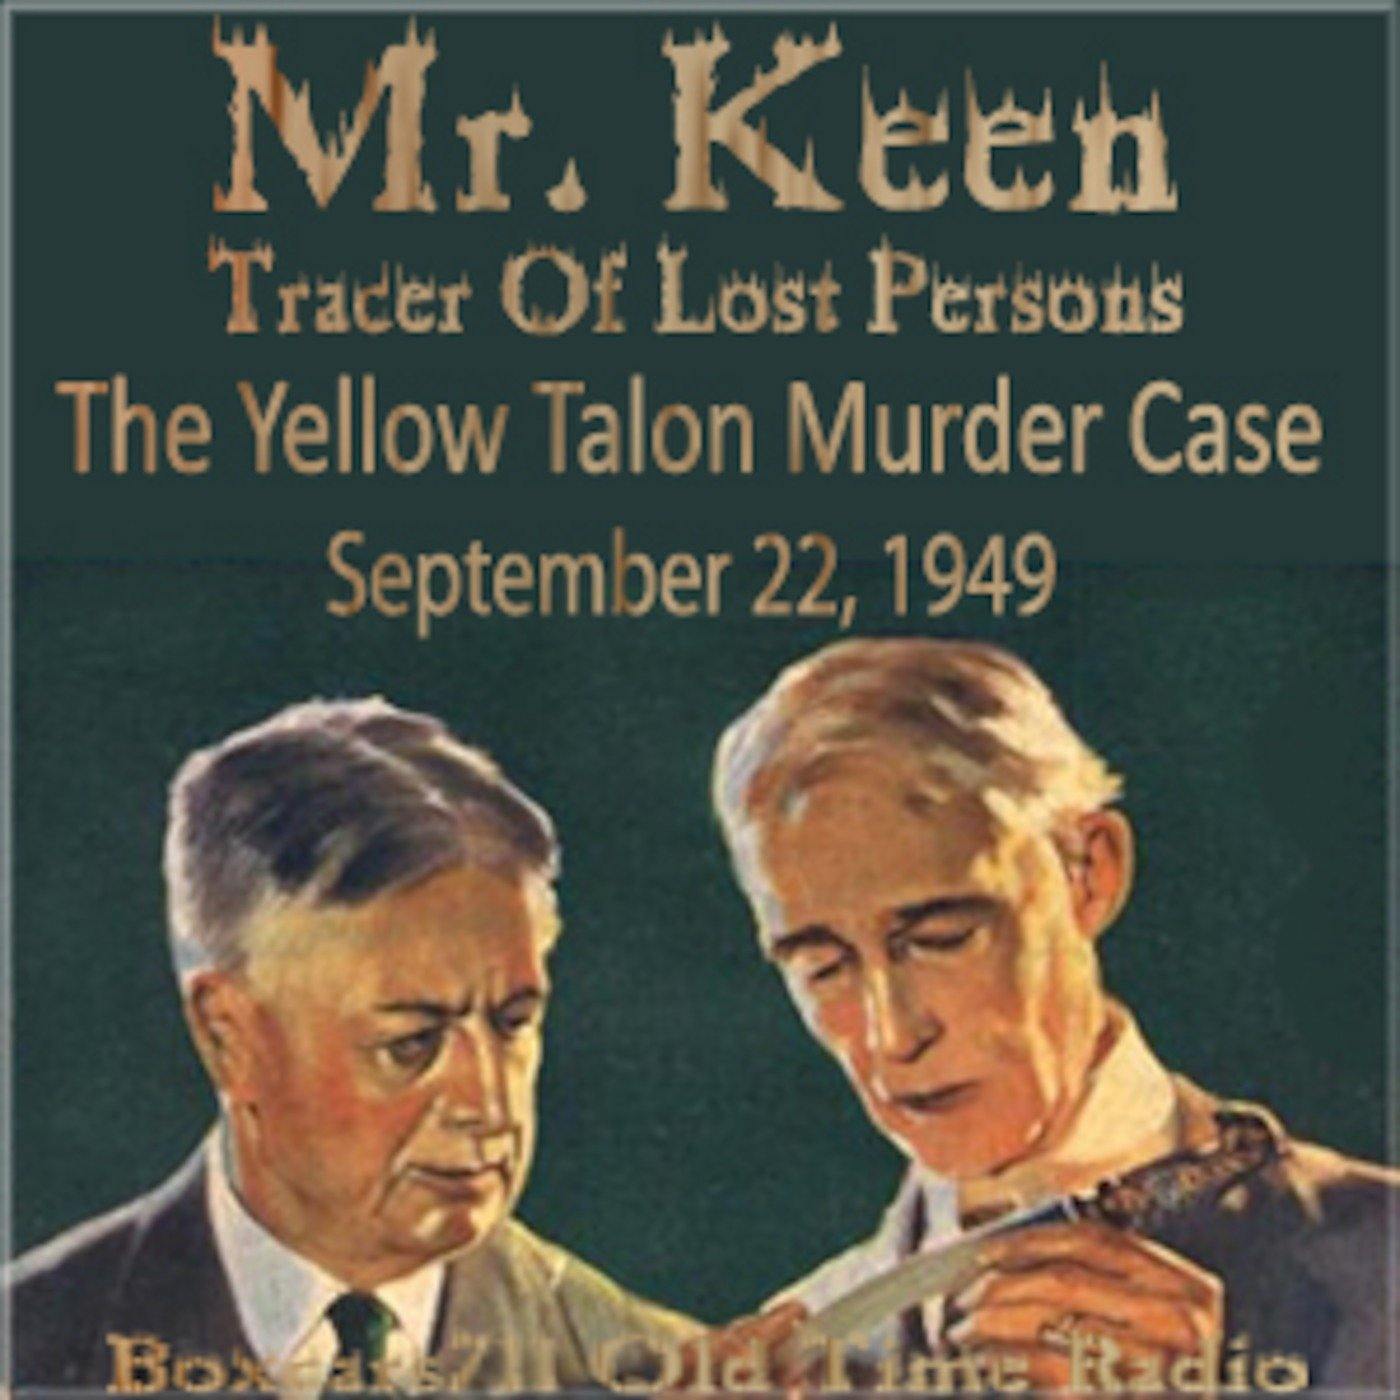 Mr. Keen, Tracer Of Lost Persons - OTR World